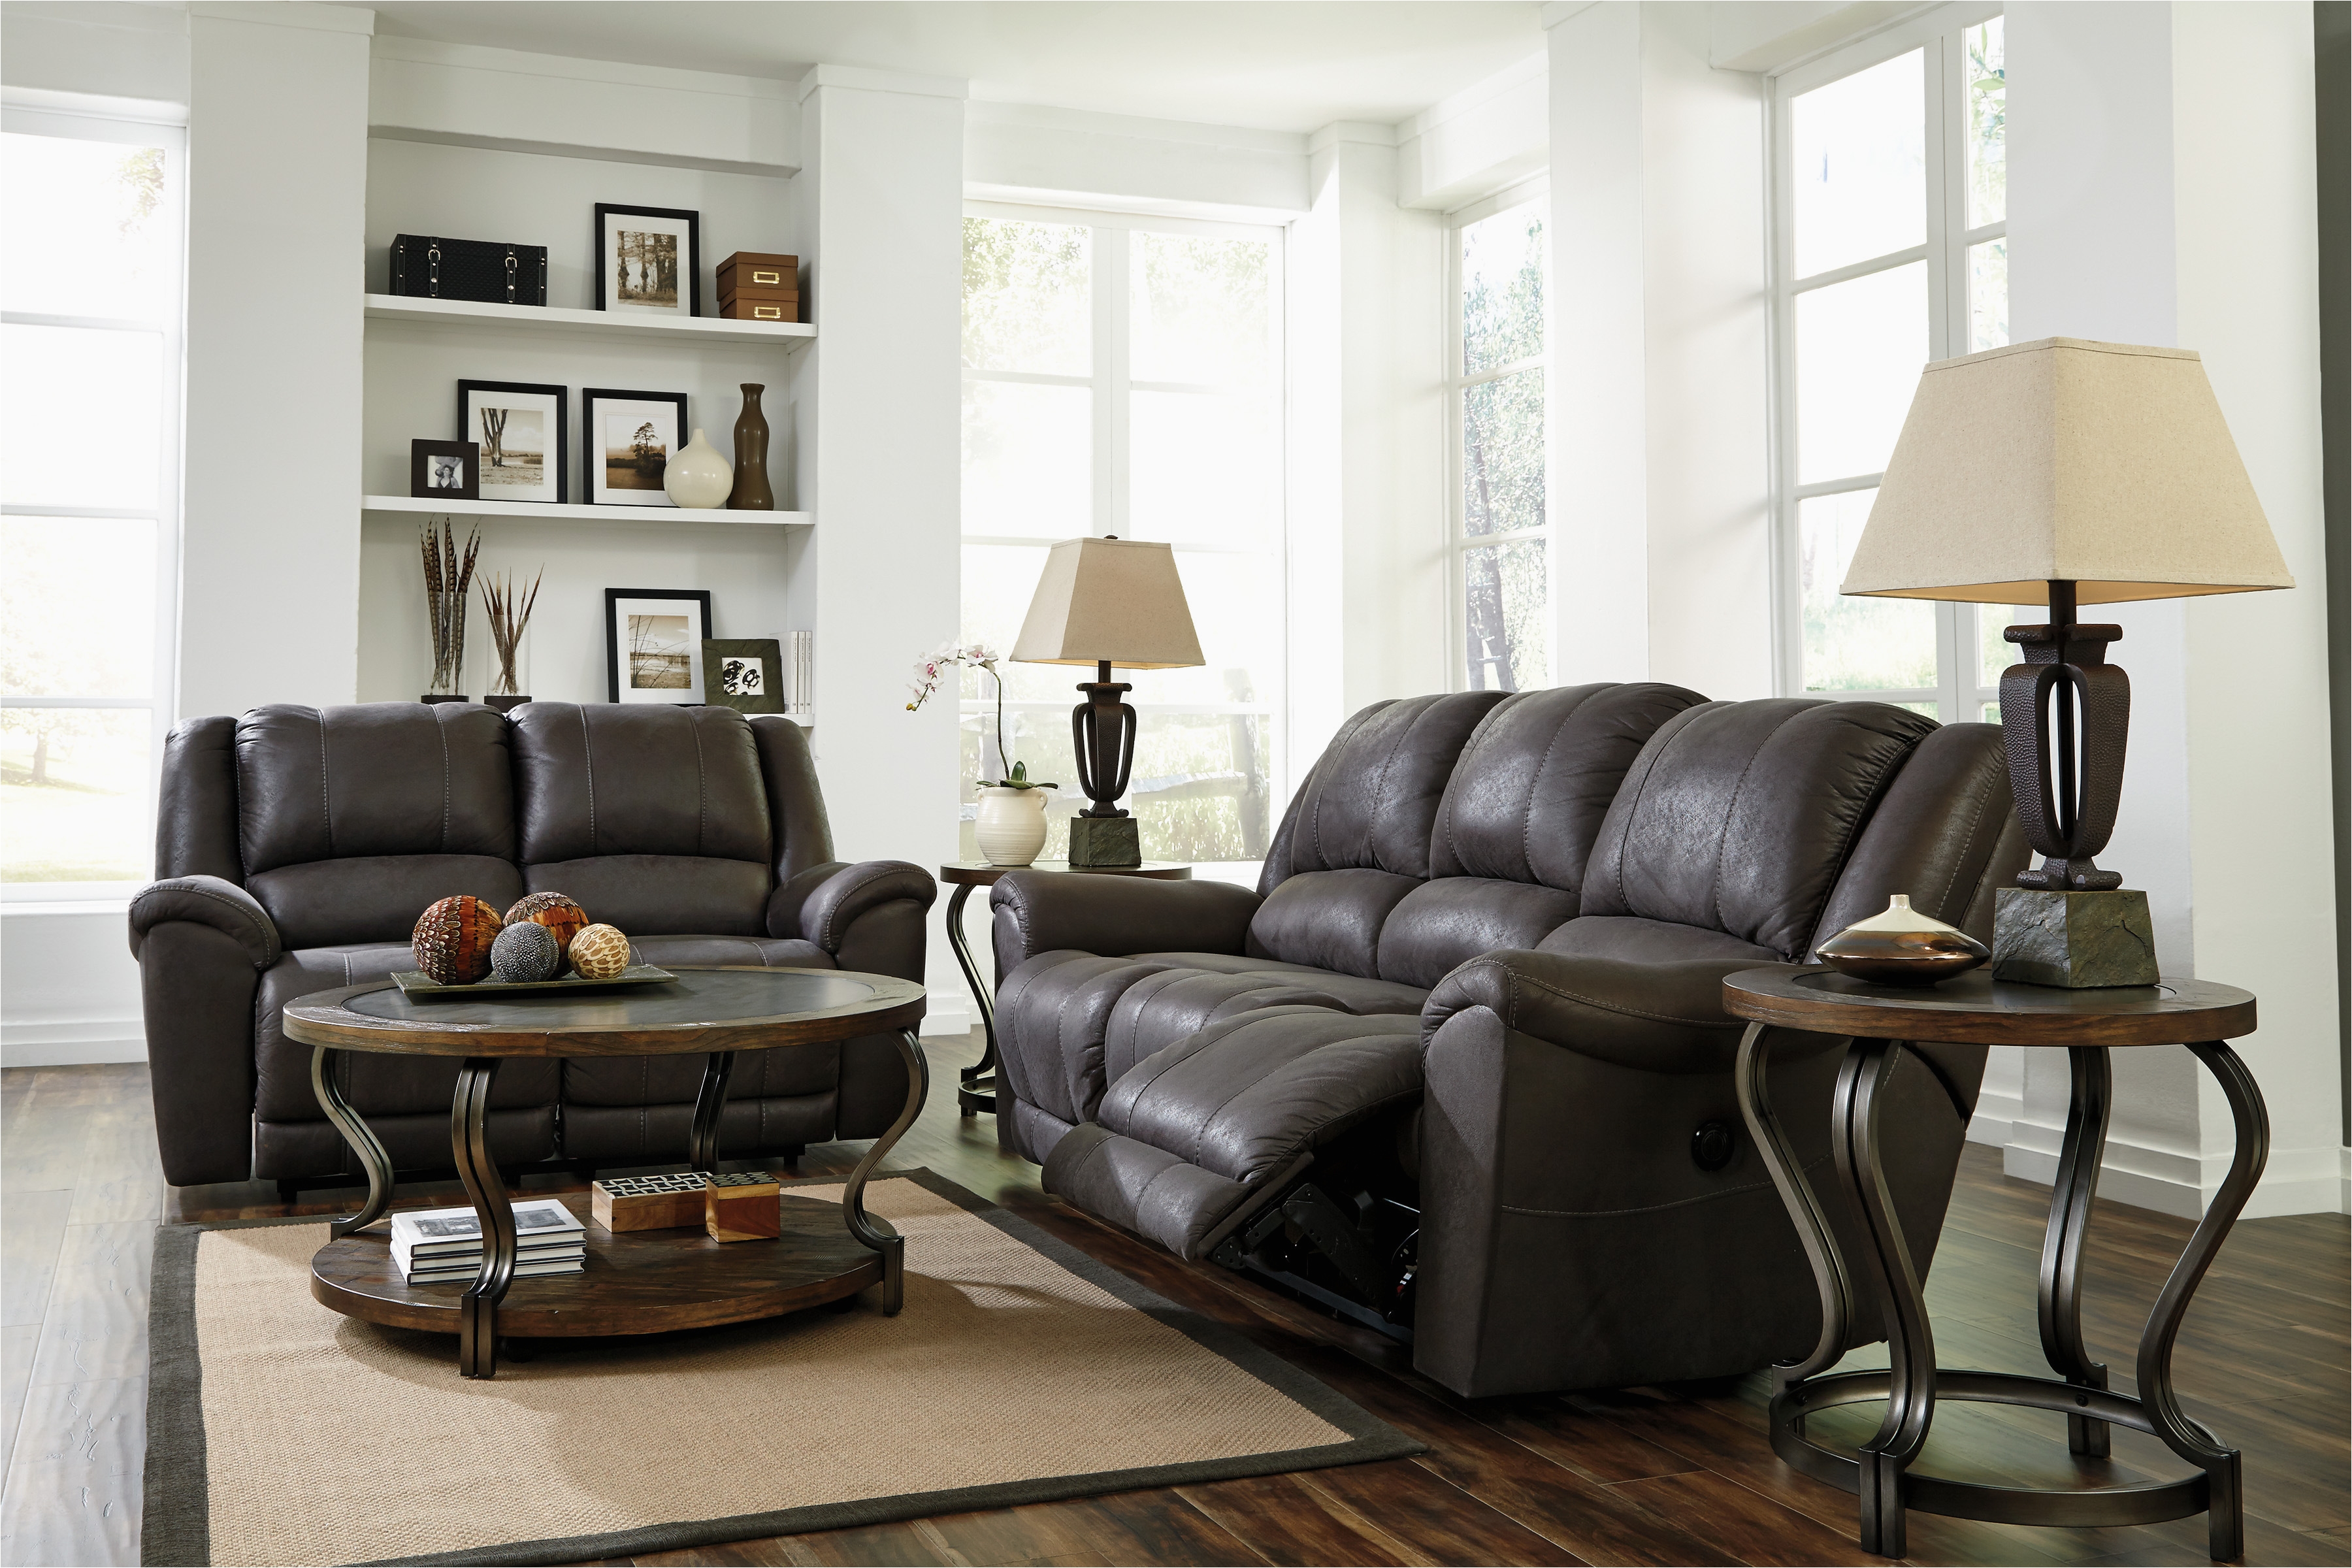 ashley furniture clearance center awesome living rooms recliners pics of ashley furniture clearance center new ashley